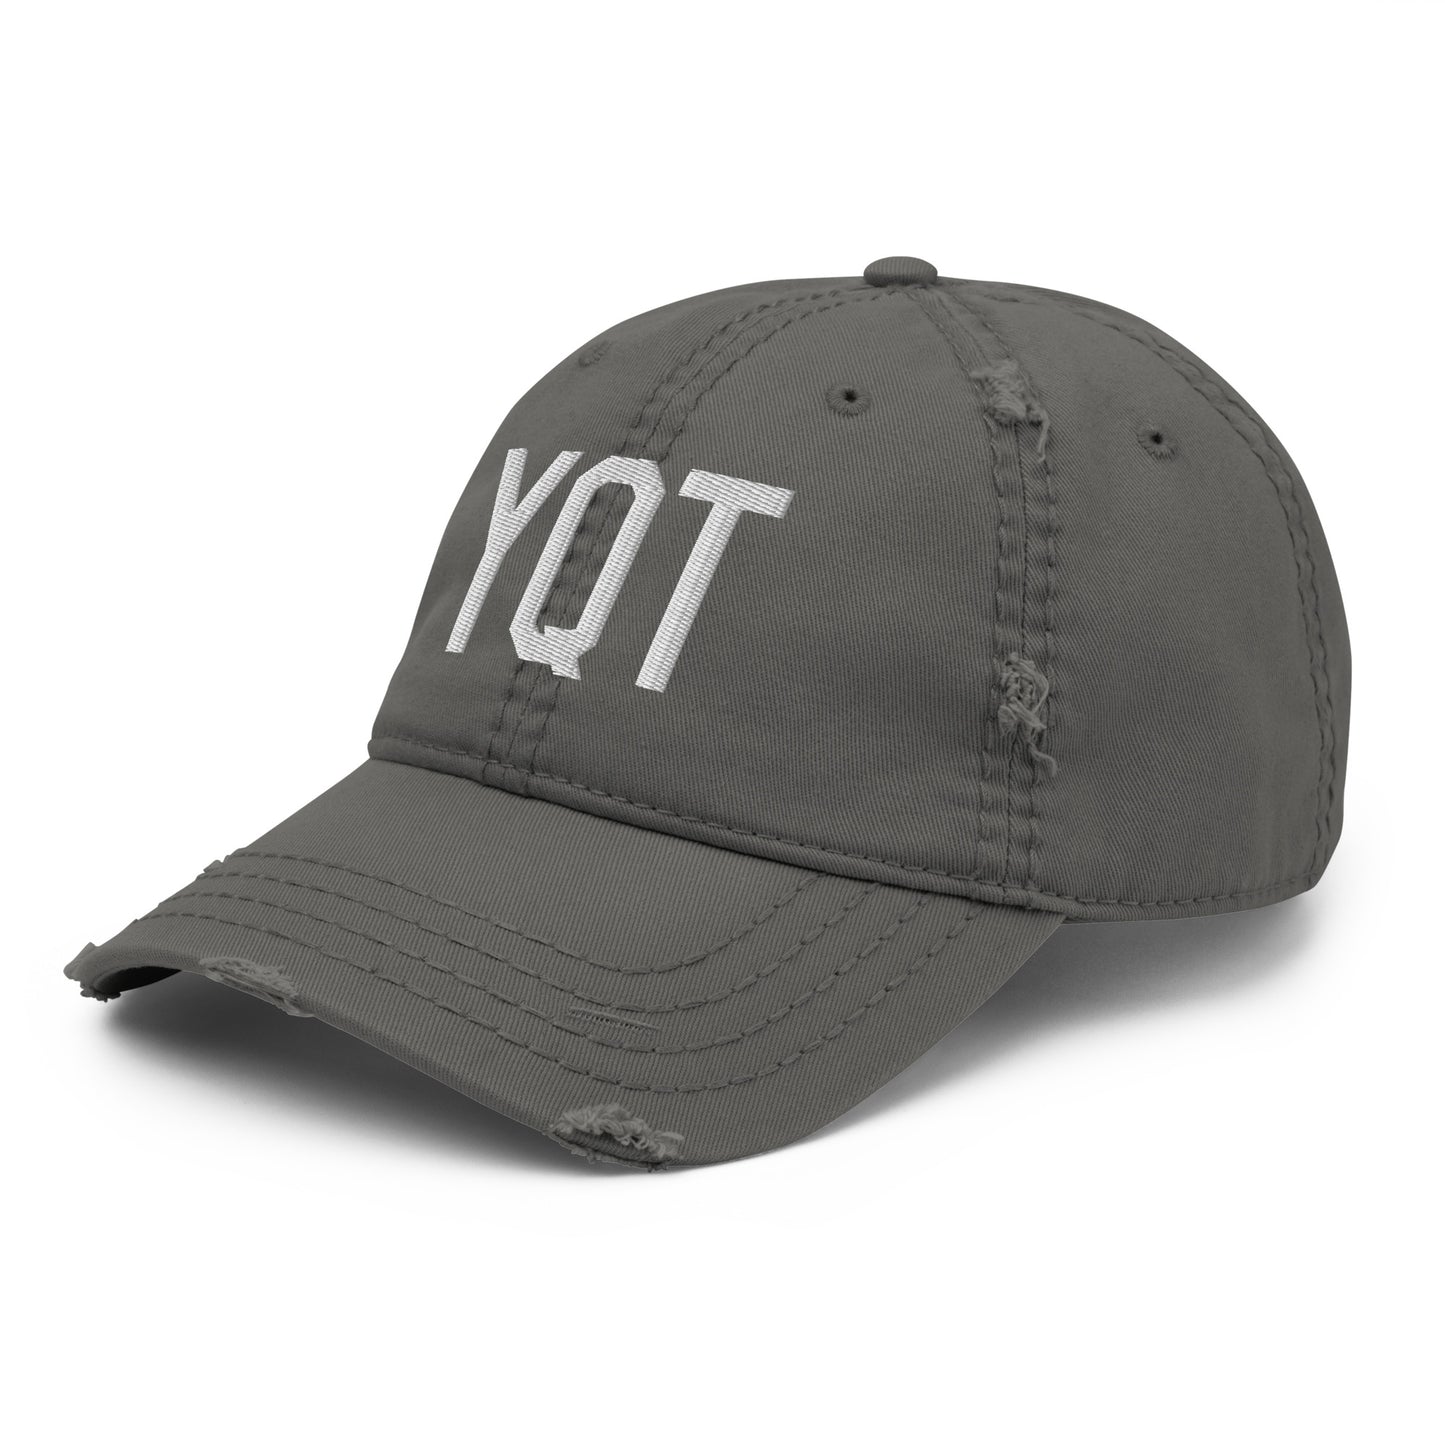 Airport Code Distressed Hat - White • YQT Thunder Bay • YHM Designs - Image 16